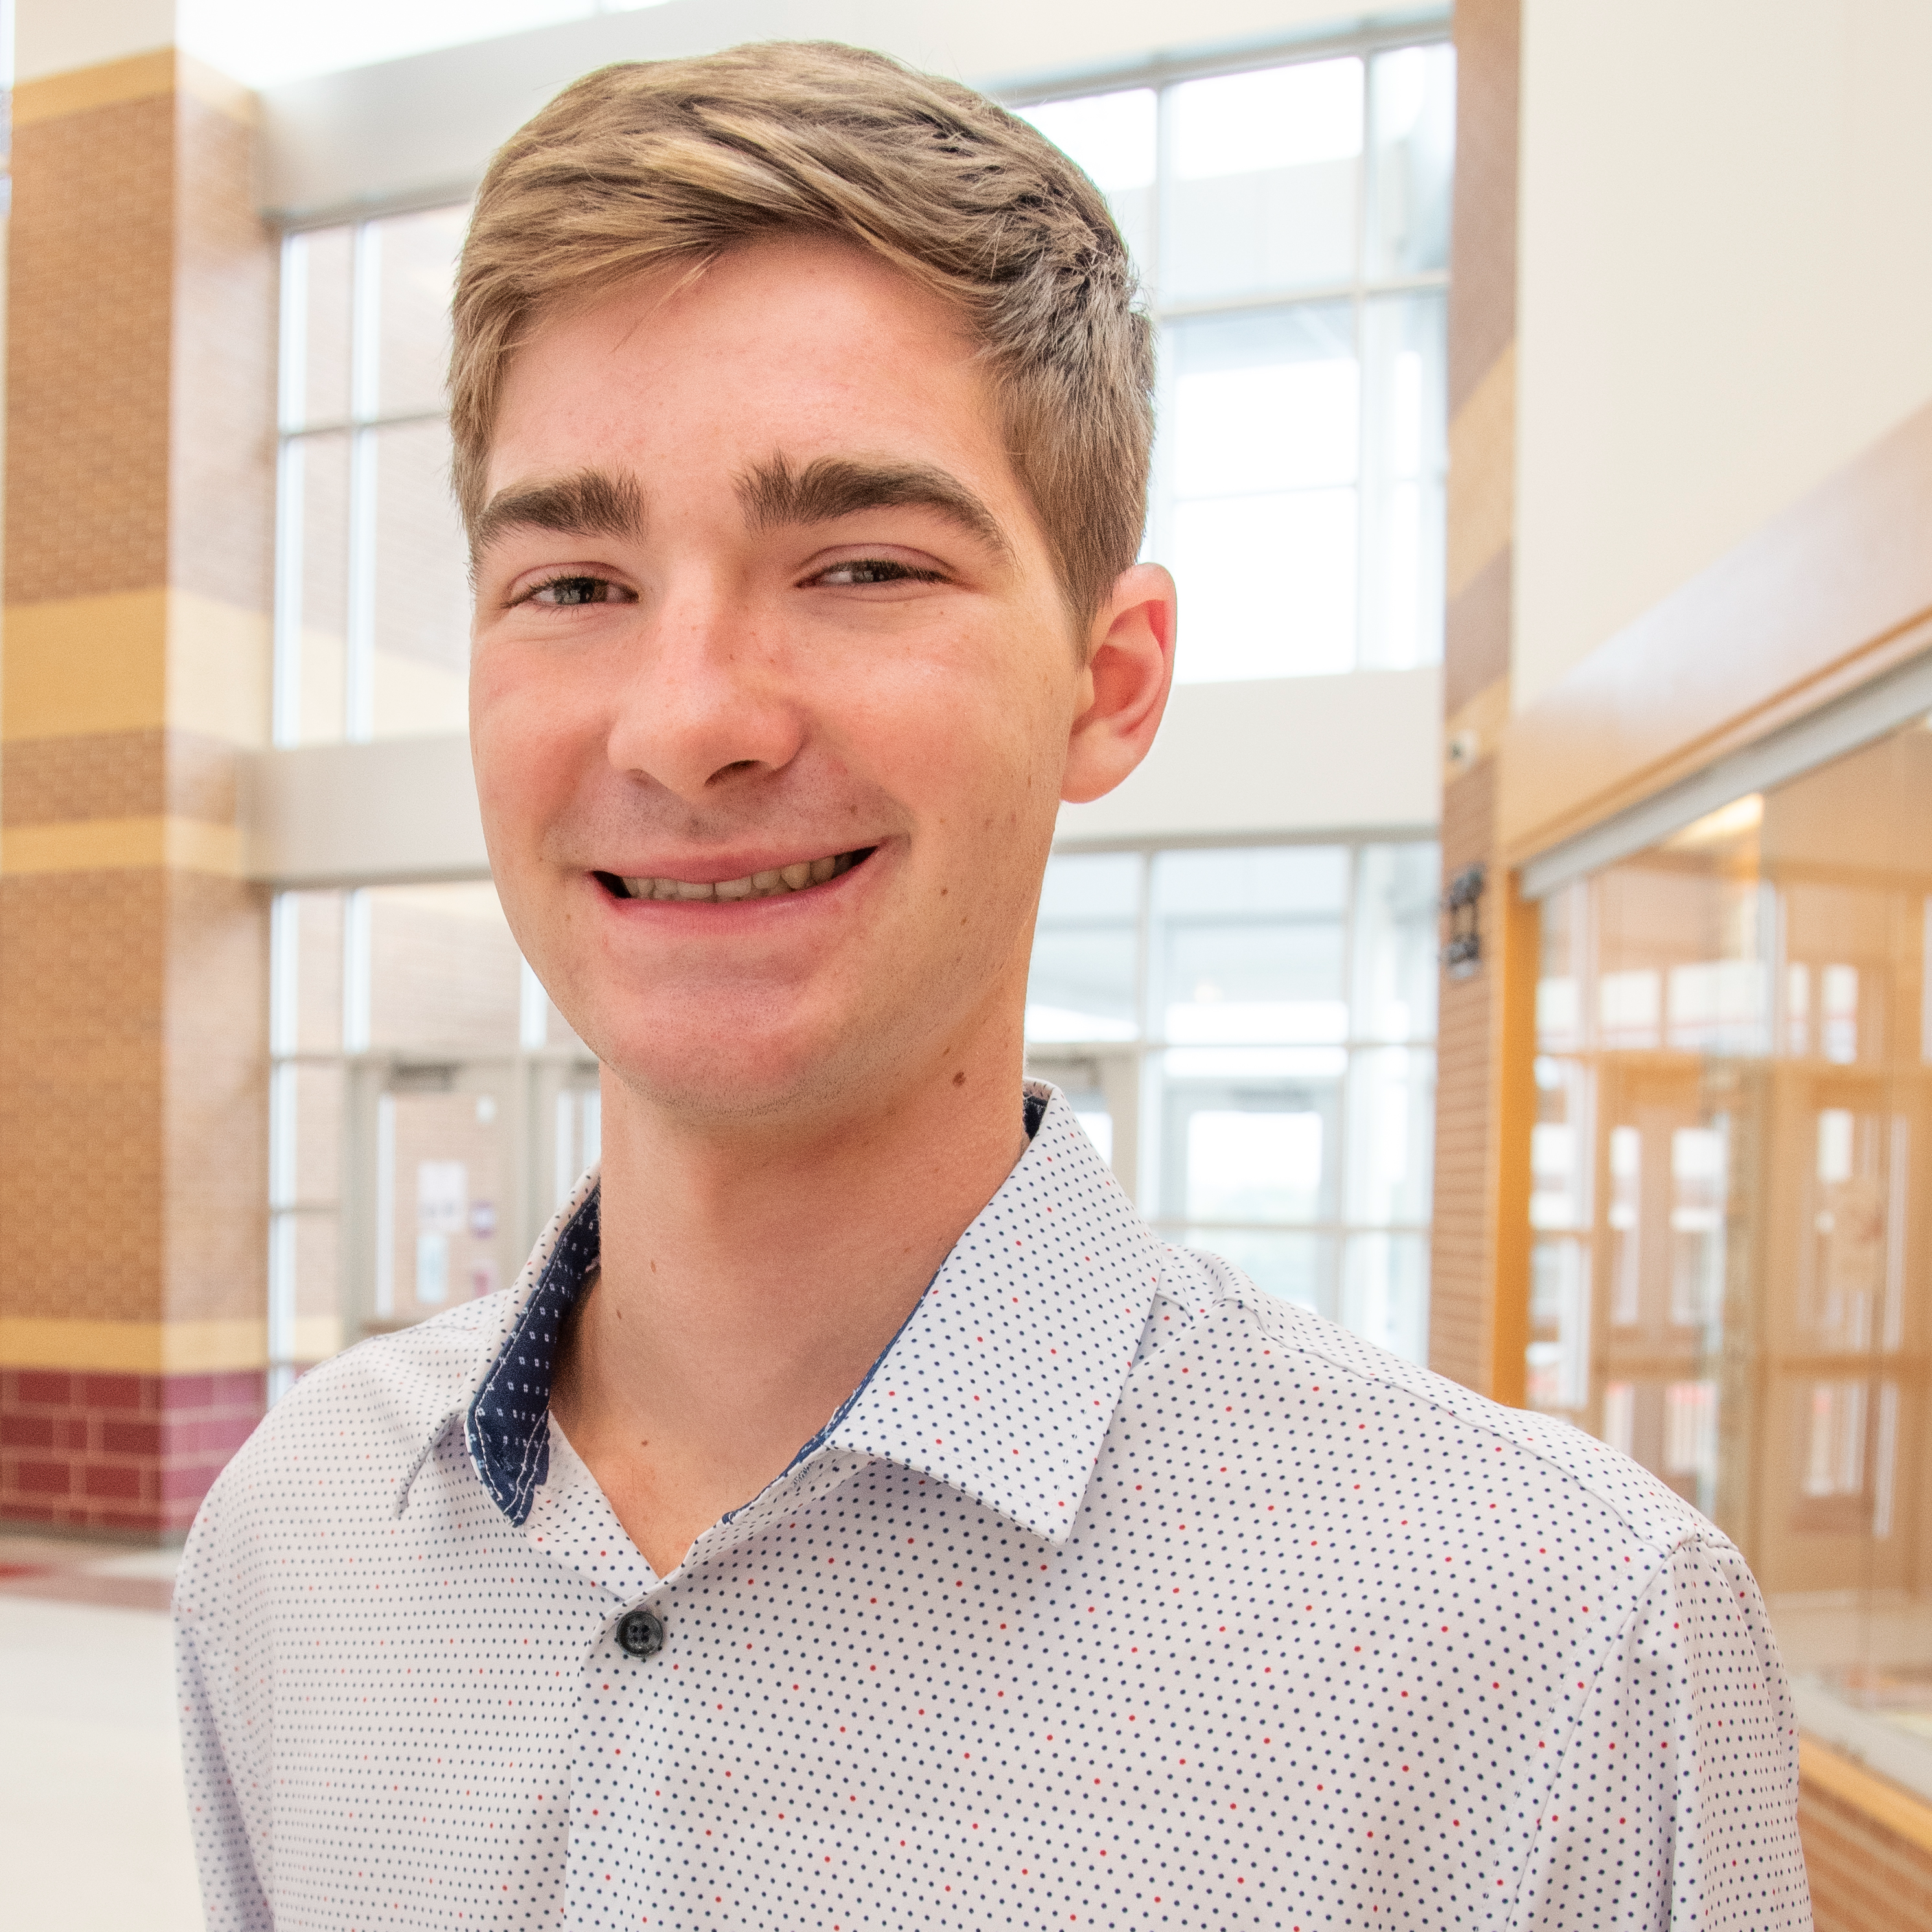 The National Merit Scholarship Corporation announced the names of more than 16,000 Semifinalists.    PISD is honored to announce PHS senior, Nathan Langley has been named a Semifinalist.  